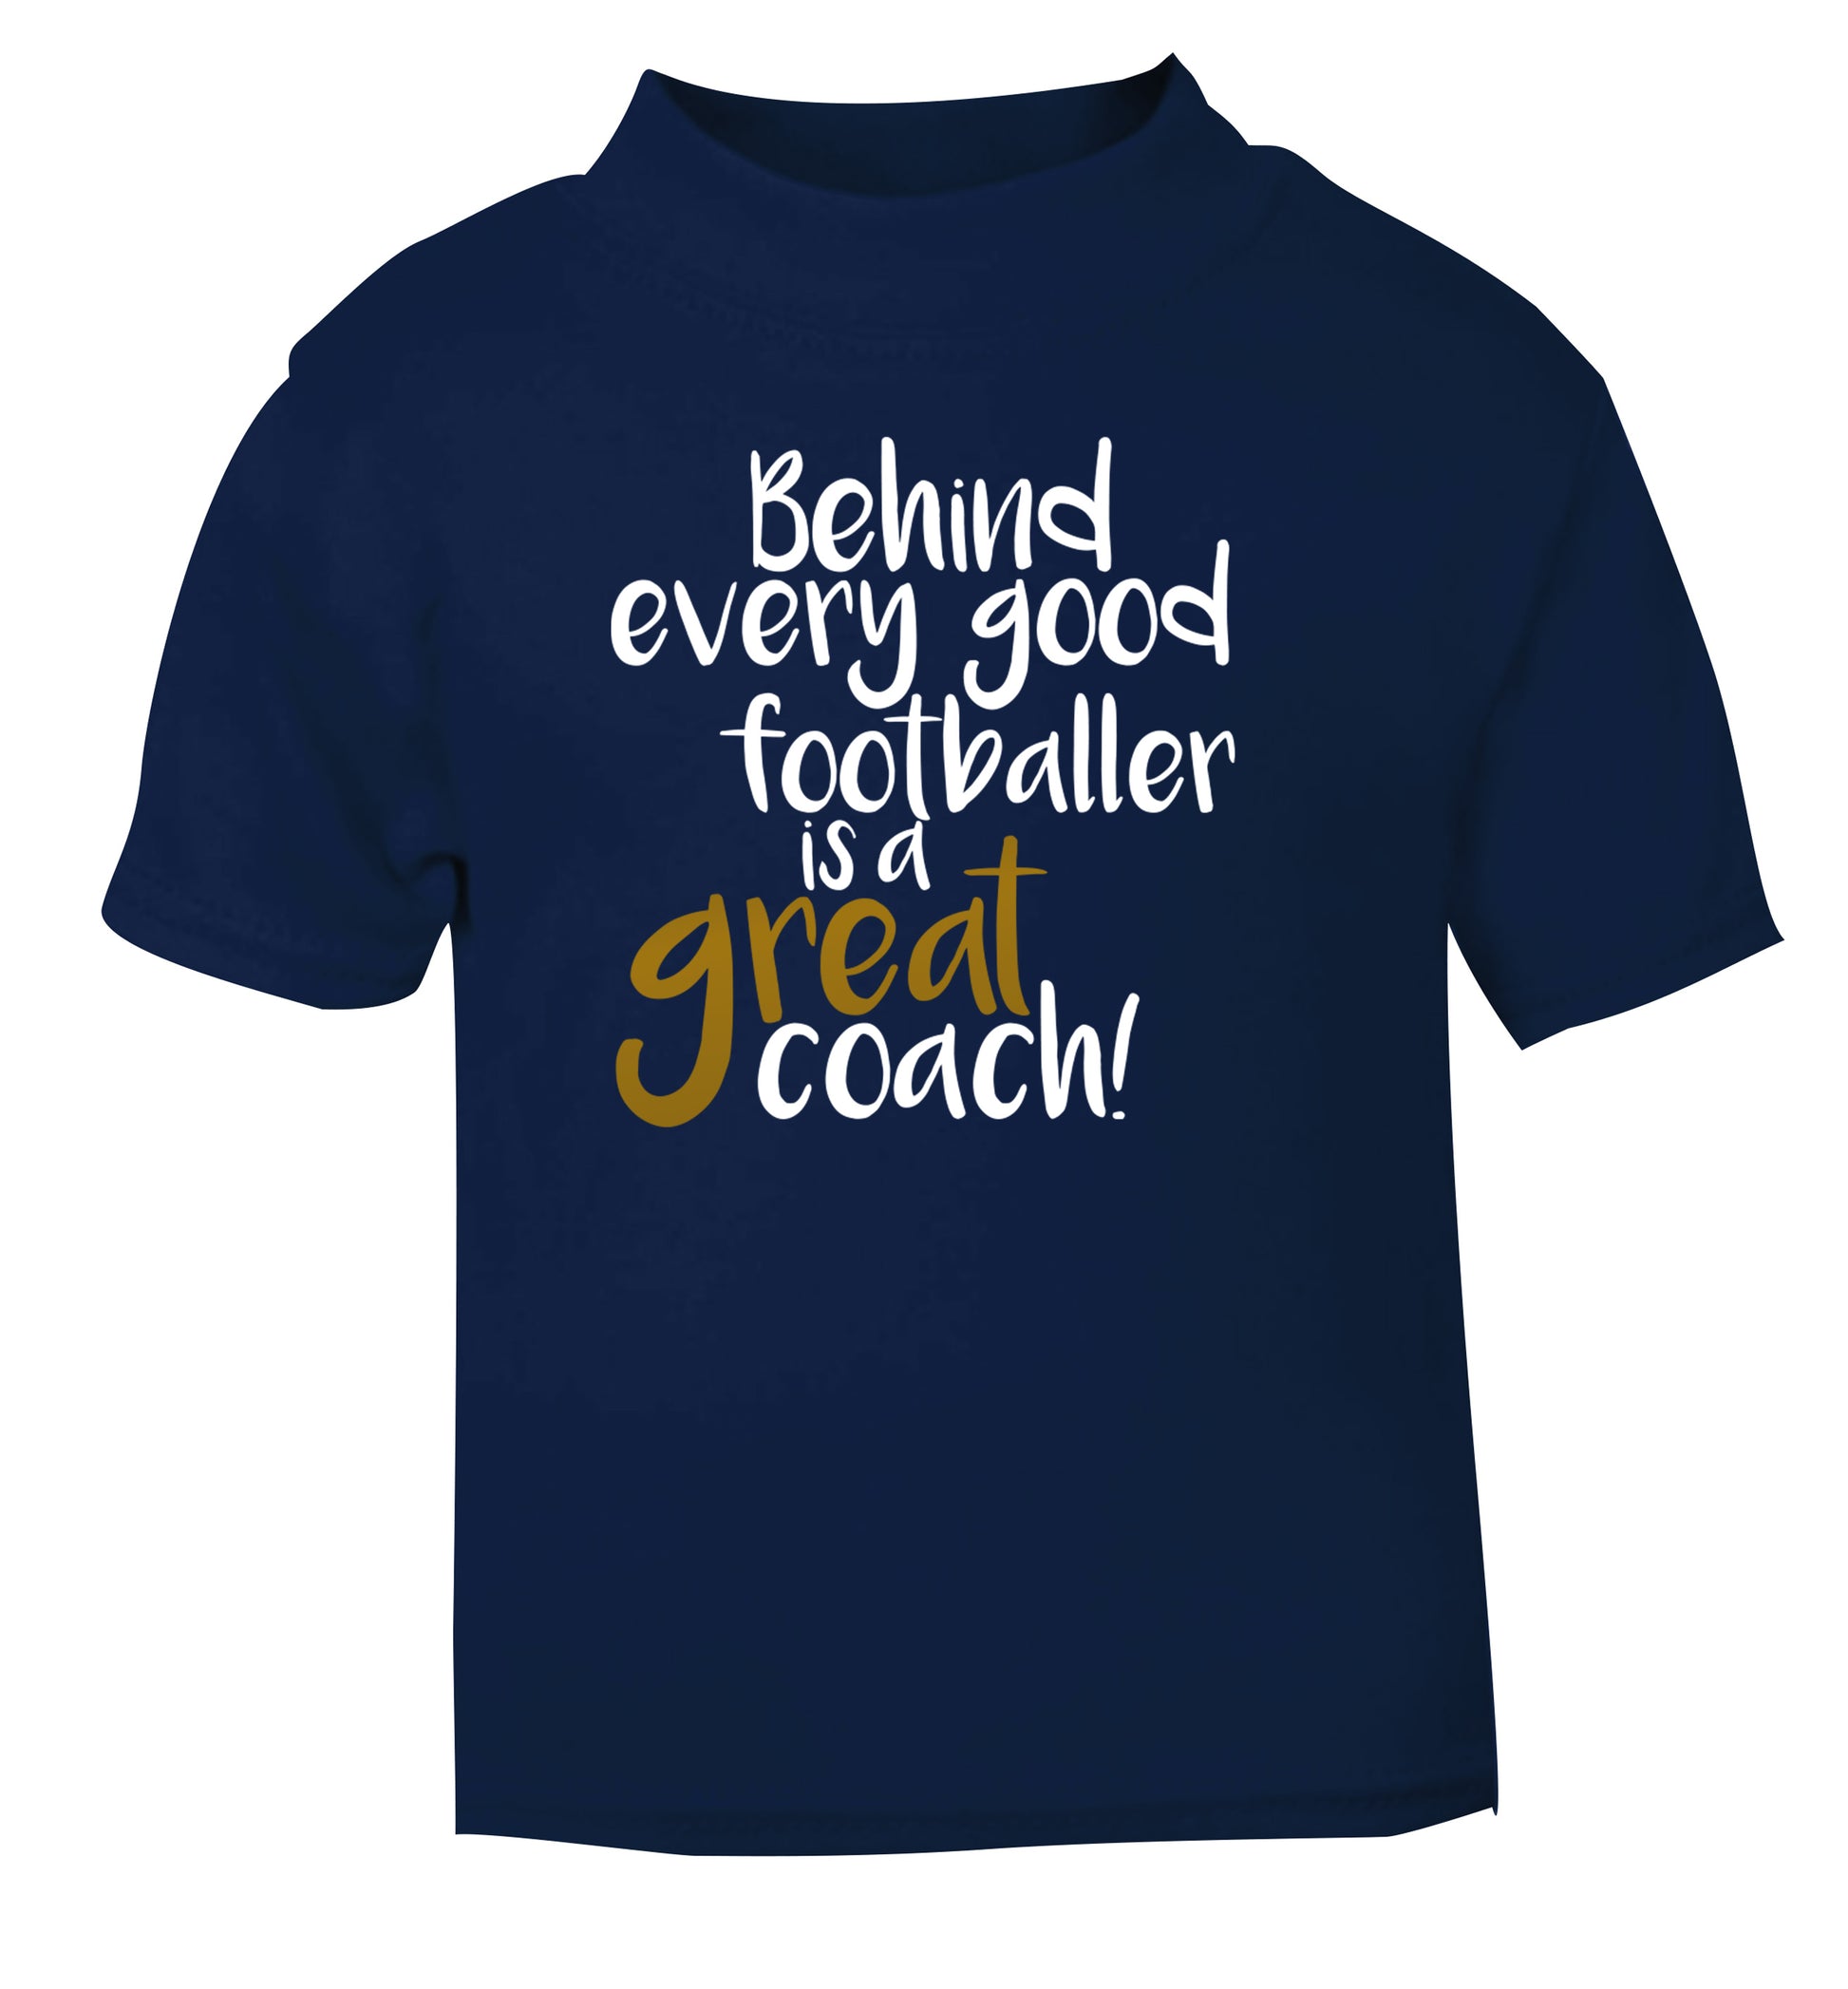 Behind every good footballer is a great coach! navy Baby Toddler Tshirt 2 Years